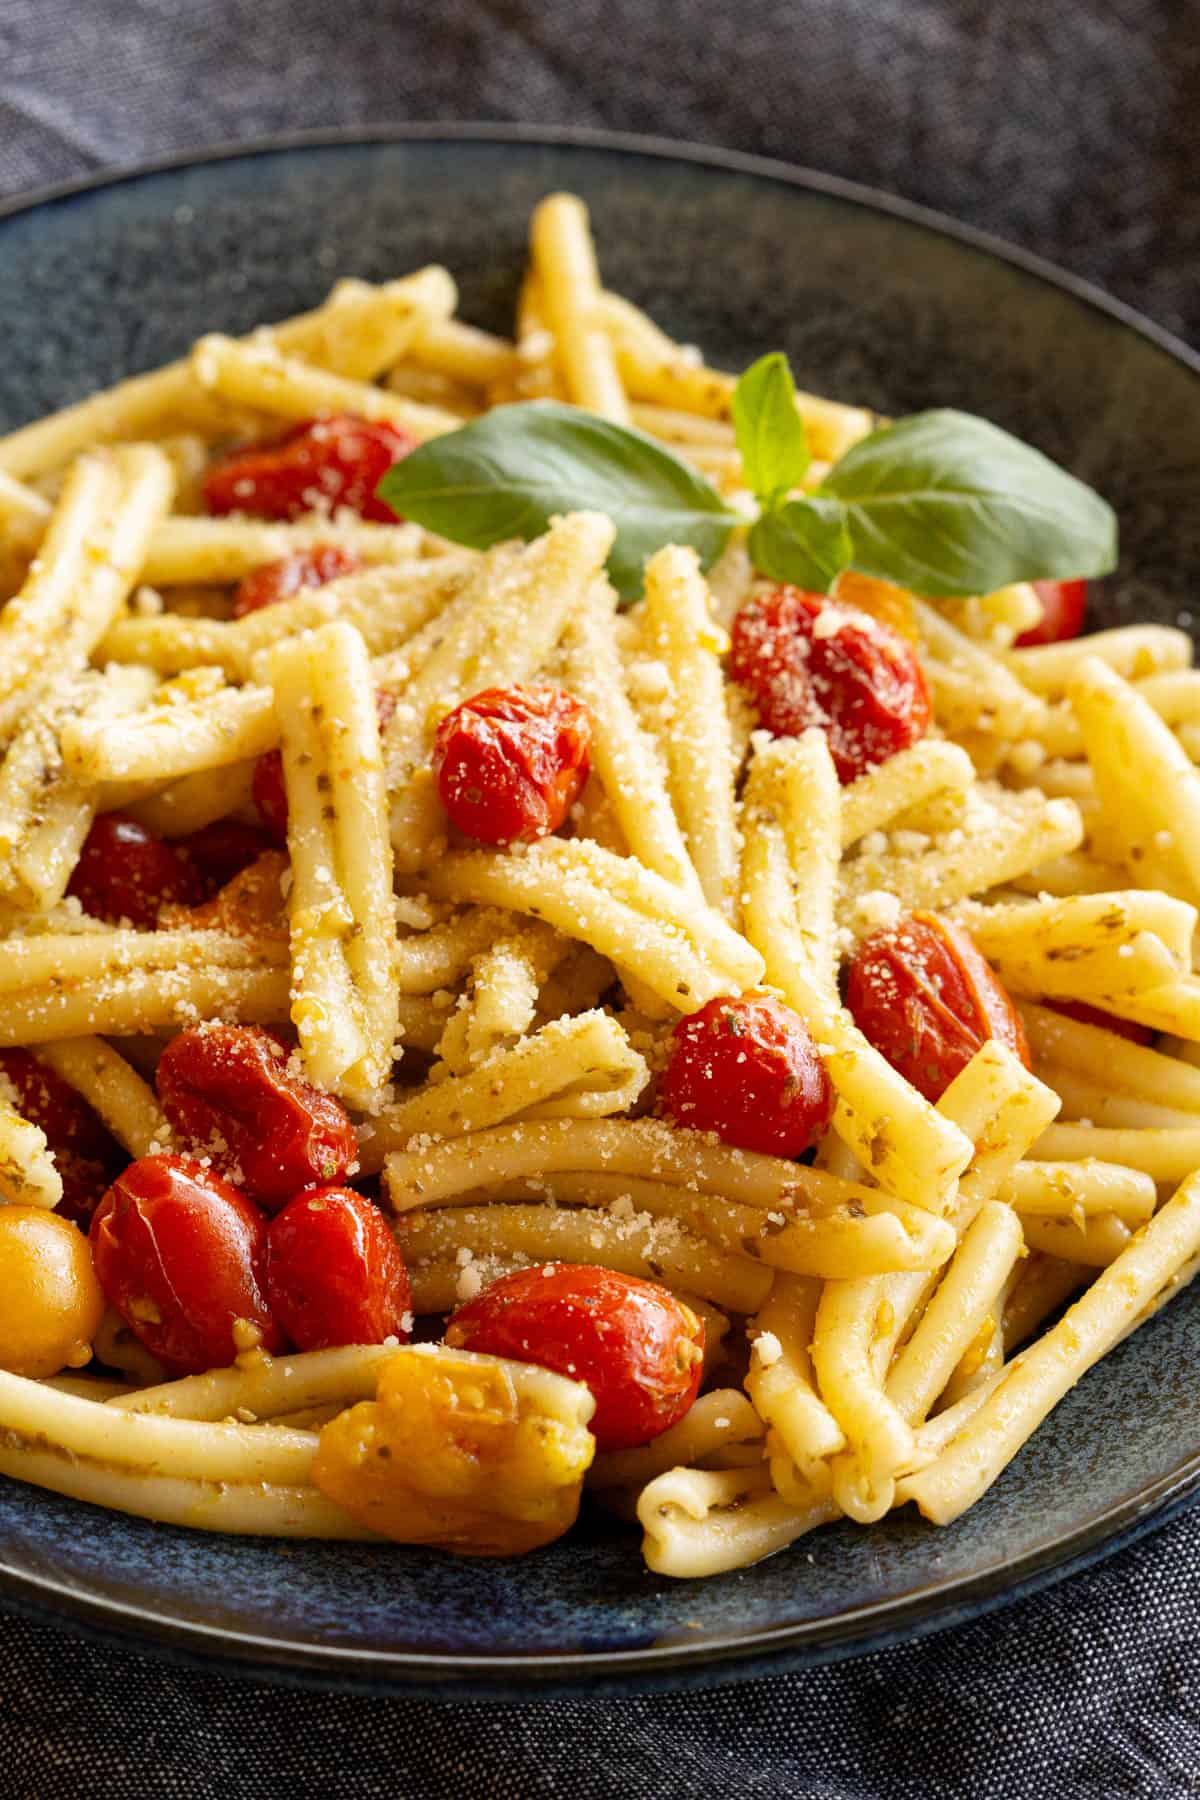 A blue bowl filled with golden pasta, bursts of red cherry tomato and a hint of green basil.